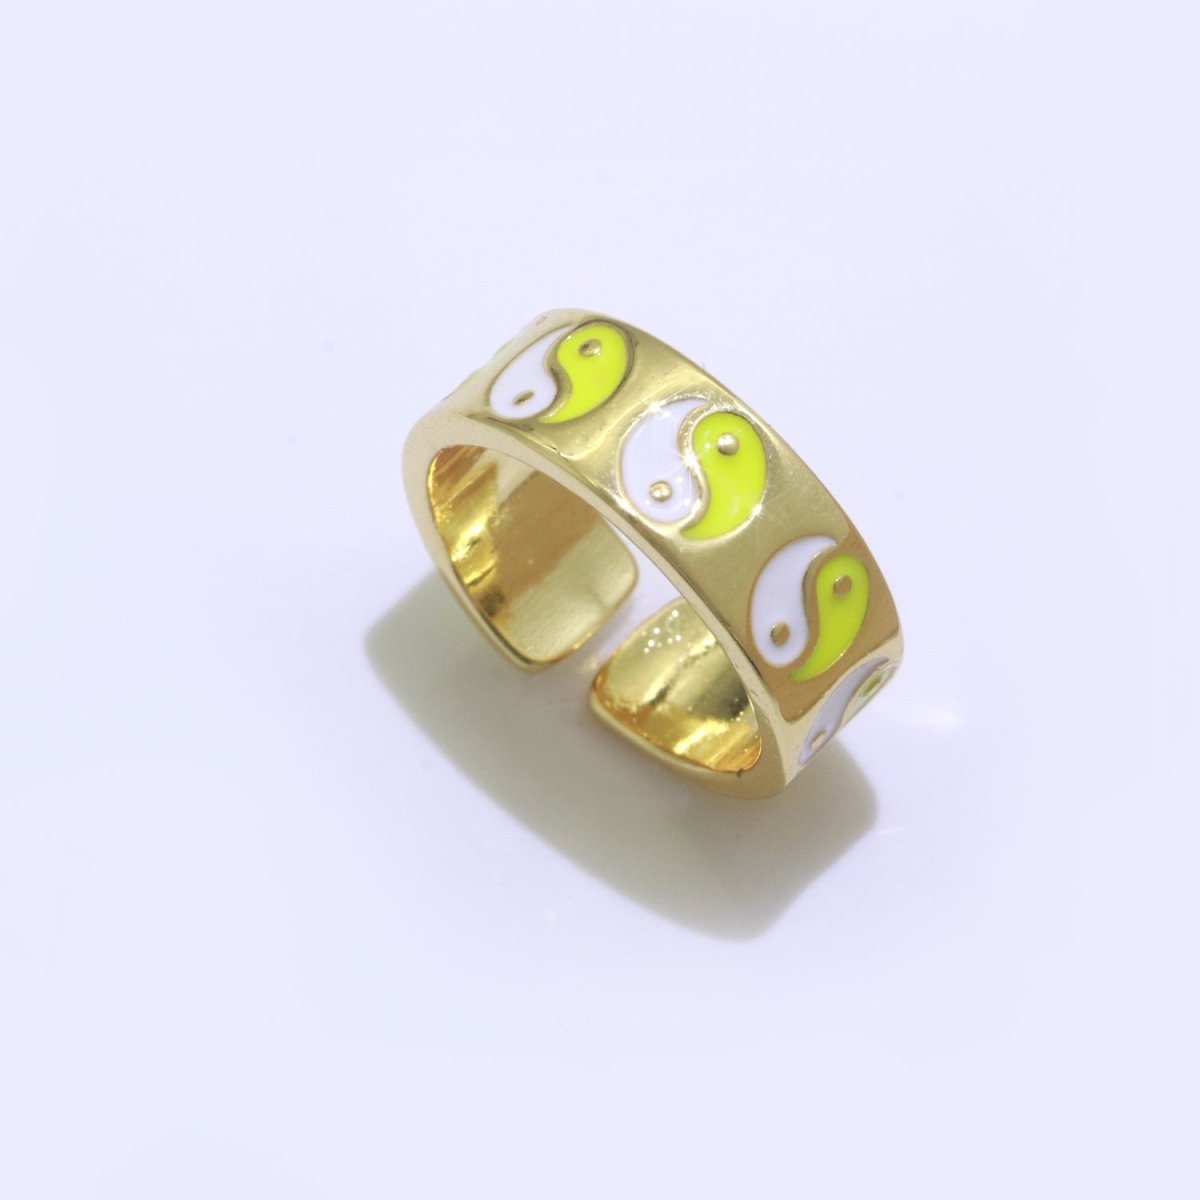 Yin Yang Ring Open Adjustable Gold Ring, Colorful Pastel Enamel Ring, Stackable Ring Black White Pink blue Green Ring for Women S-001 ~ S-008 S-010 S-011 - DLUXCA